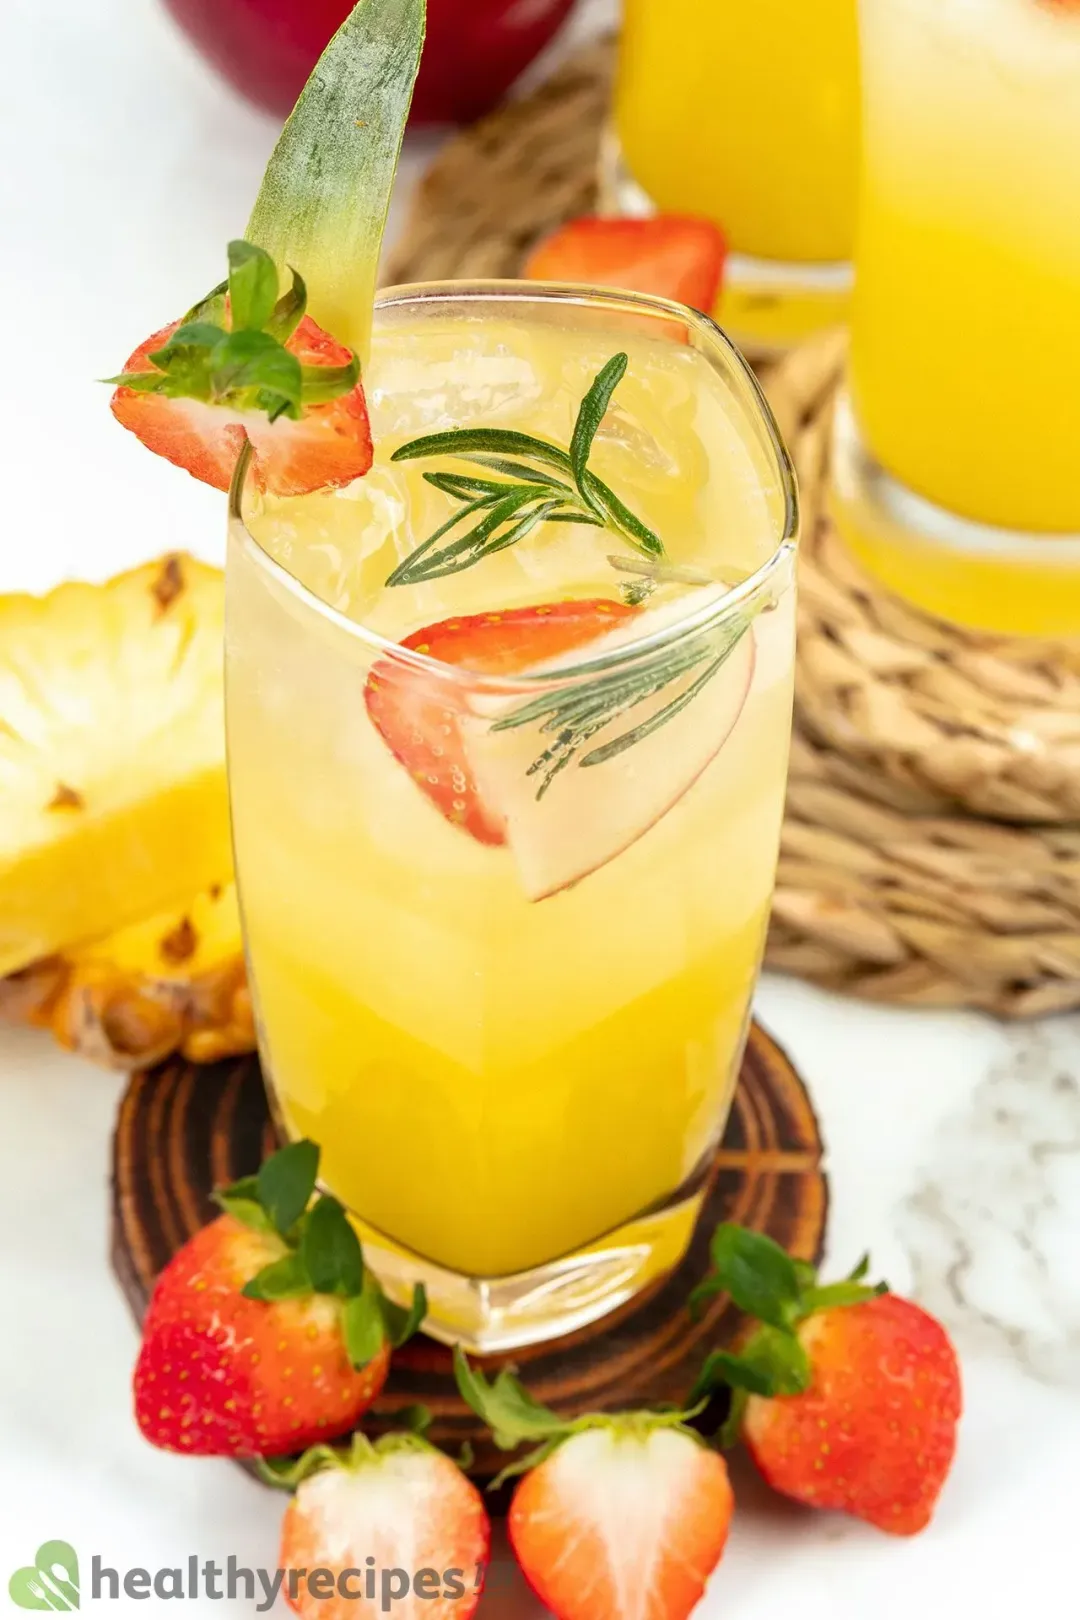 An iced glass of orange jungle juice with strawberries and rosemary as garnish